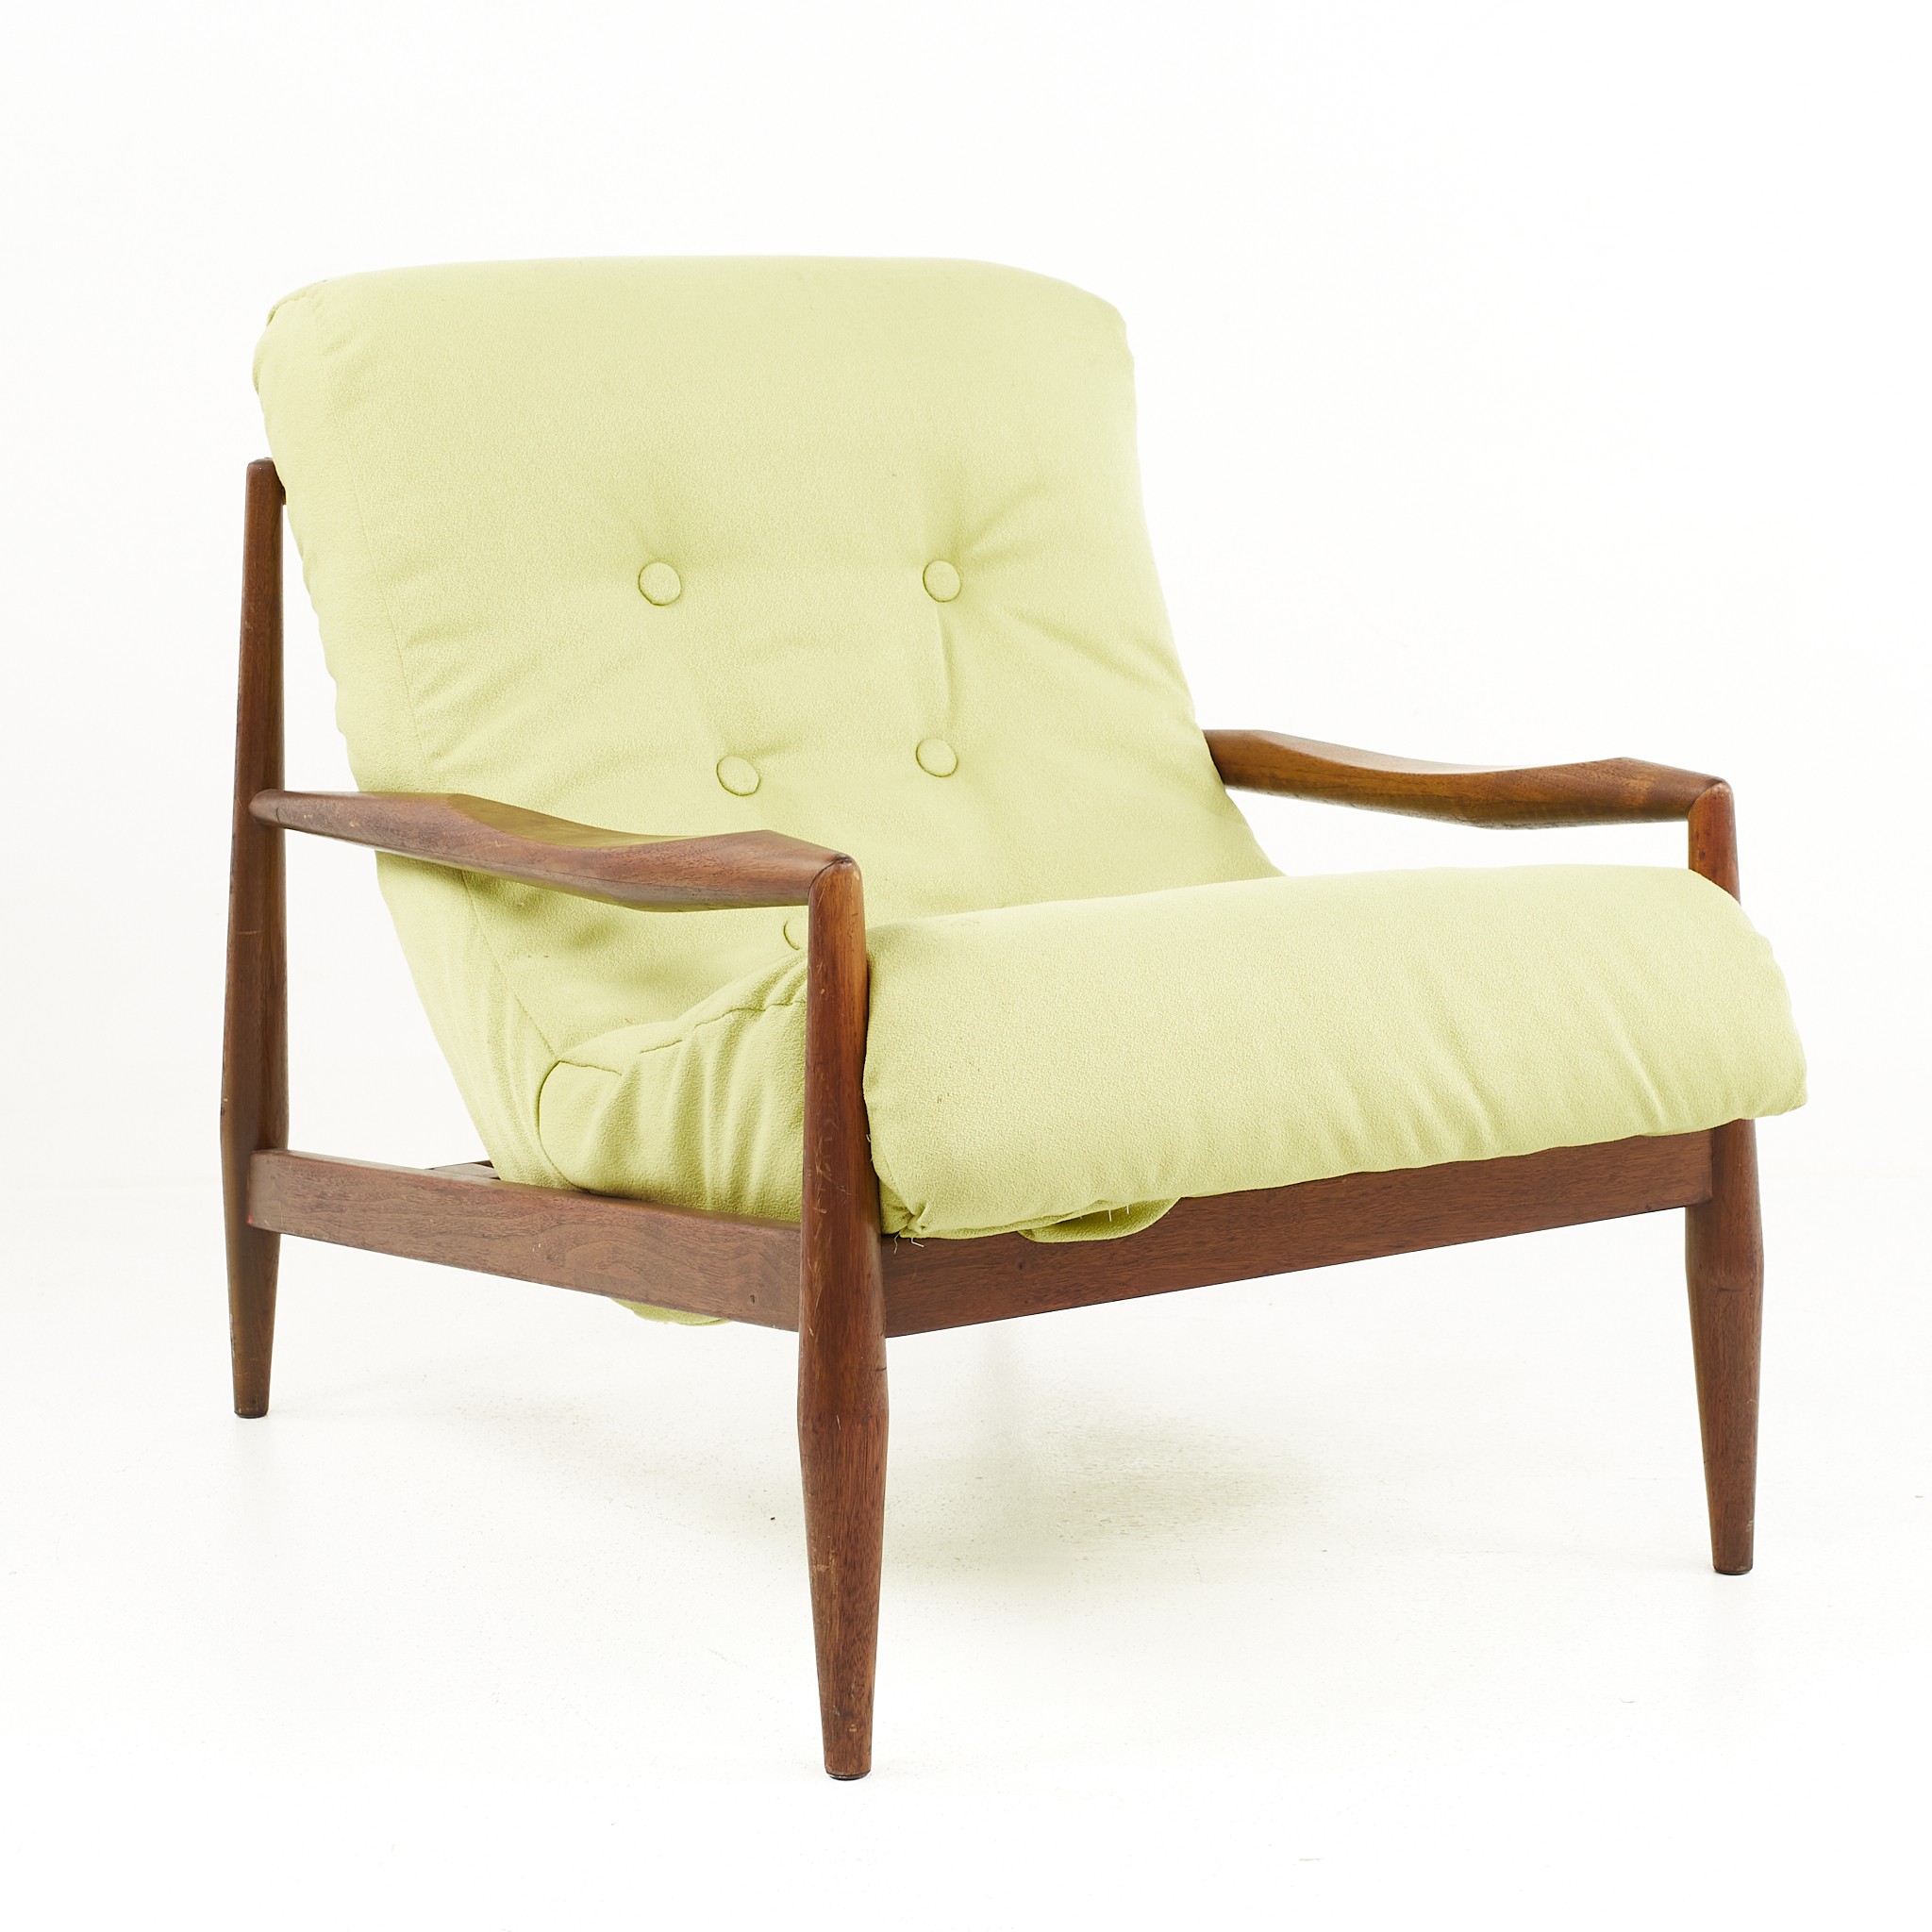 Adrian Pearsall for Craft Associates mid Century walnut Scoop Lounge Chair